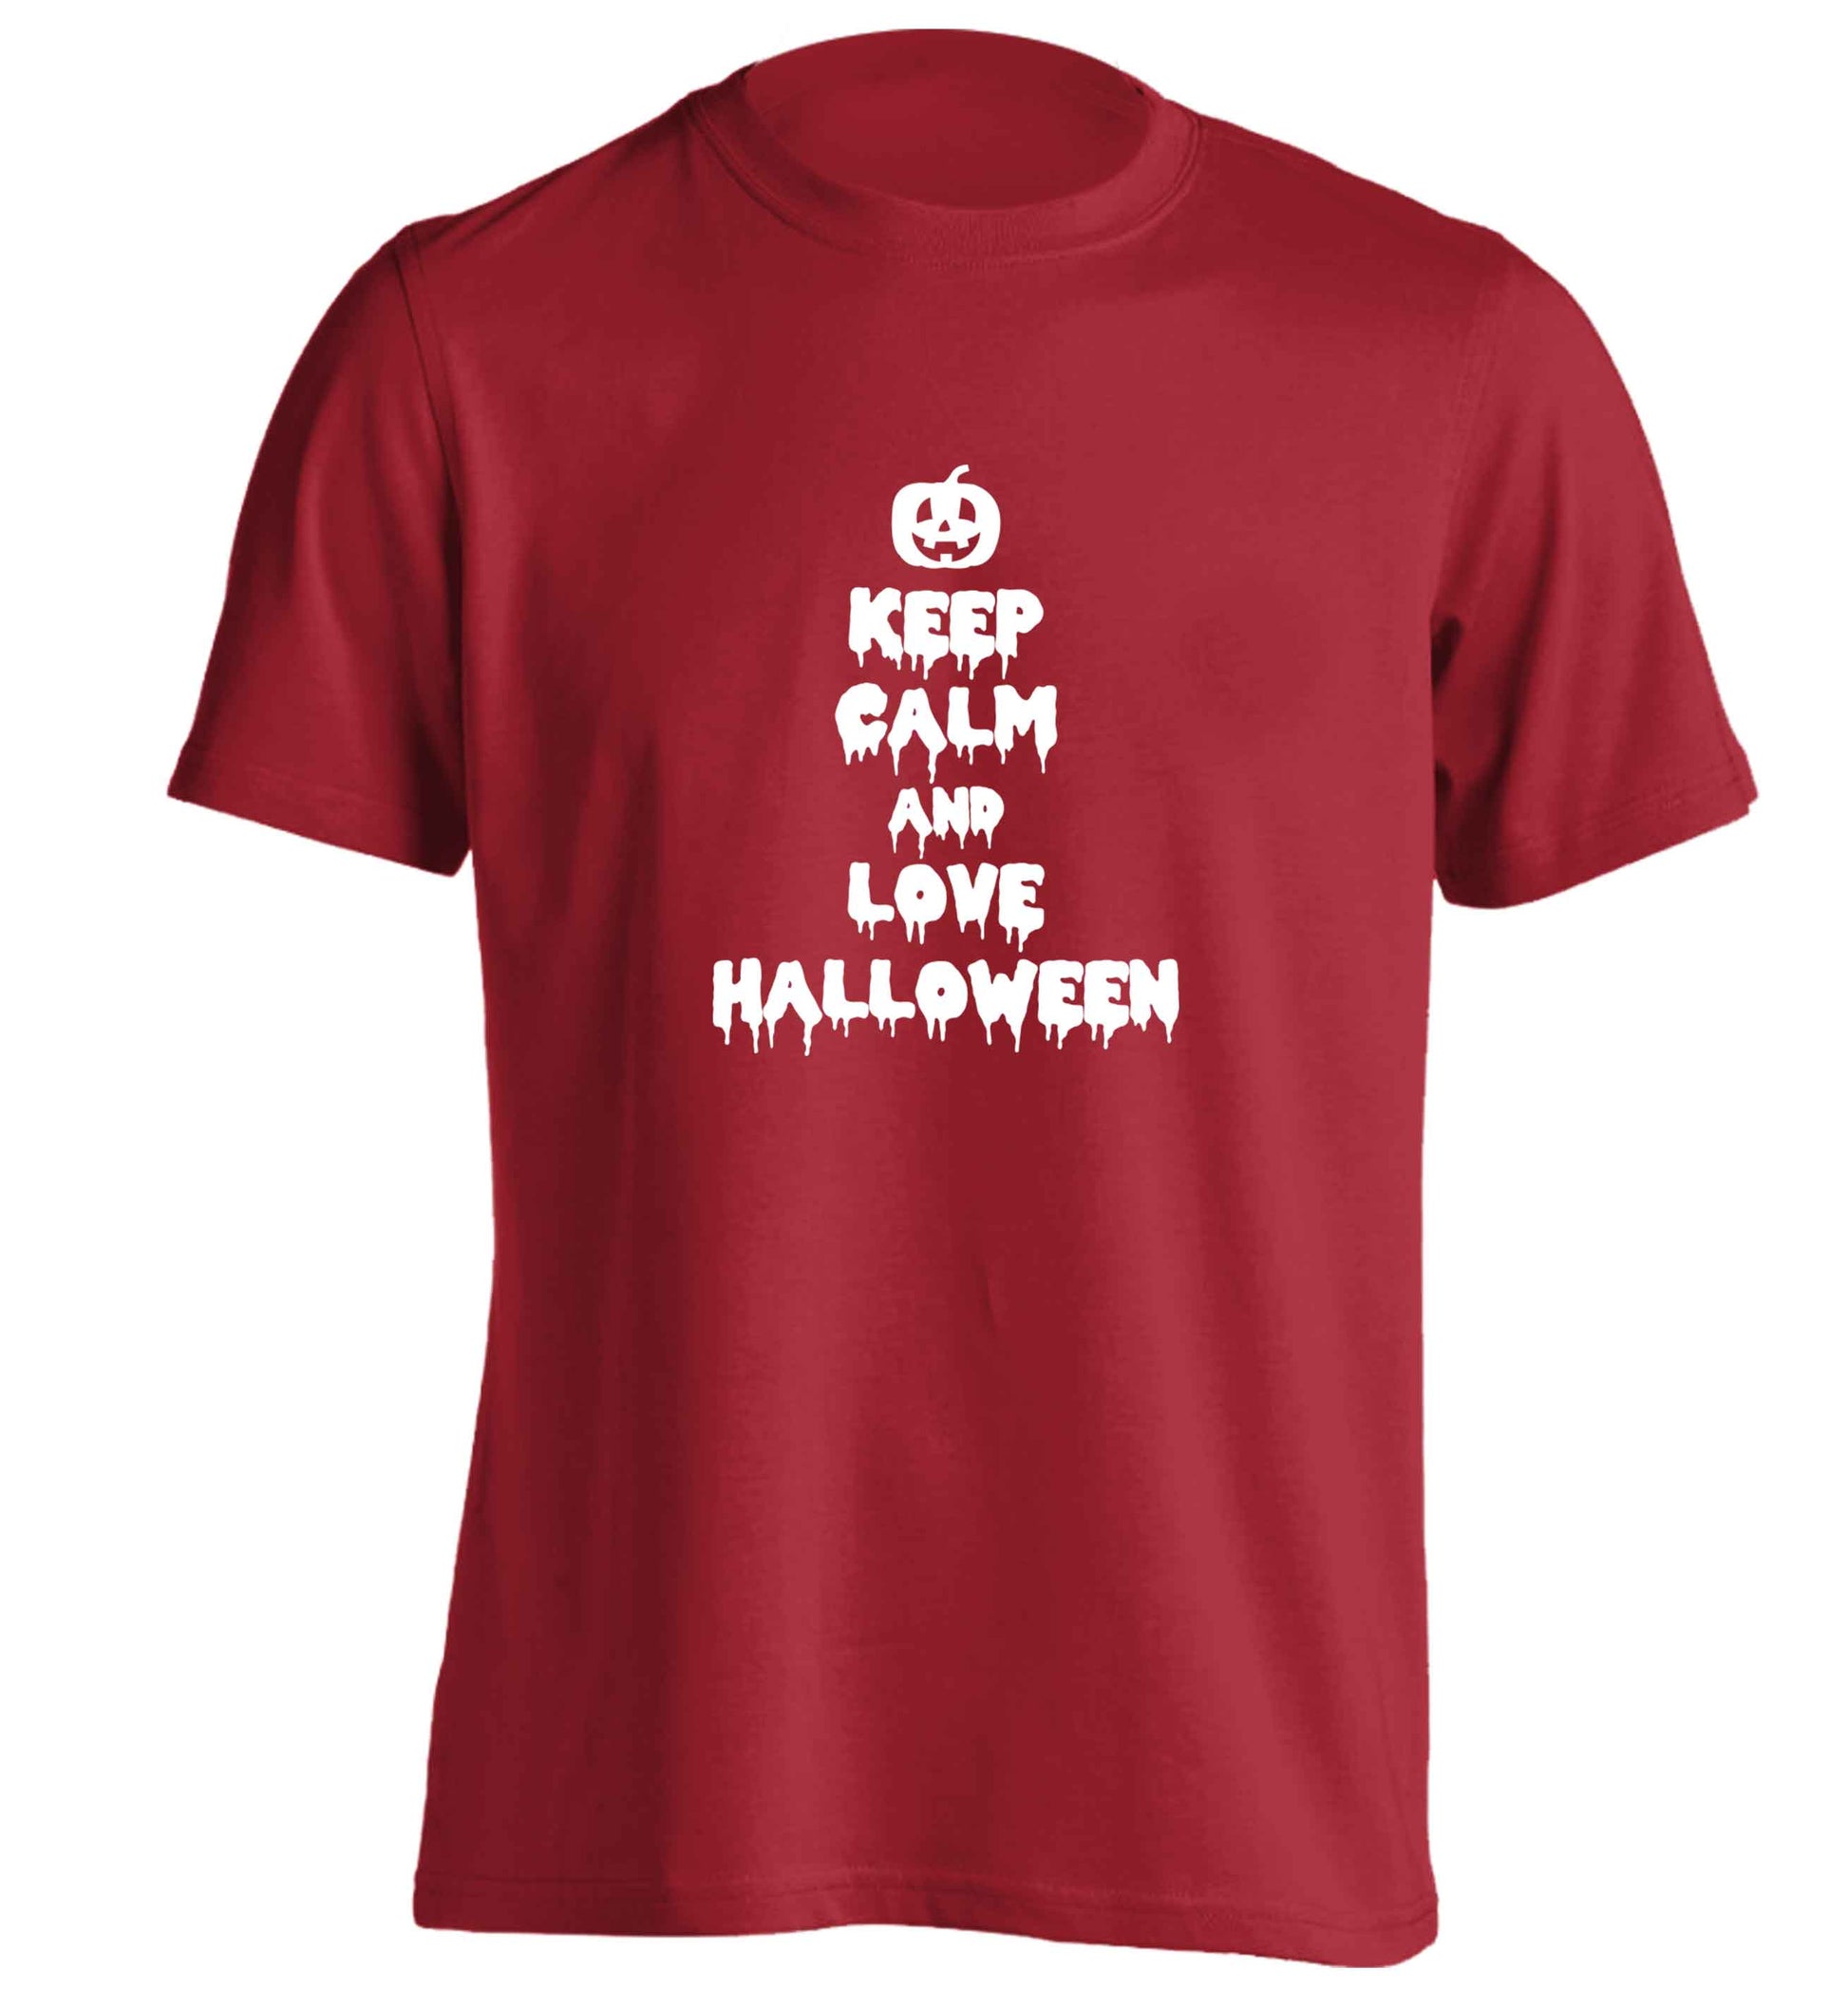 Keep calm and love halloween adults unisex red Tshirt 2XL